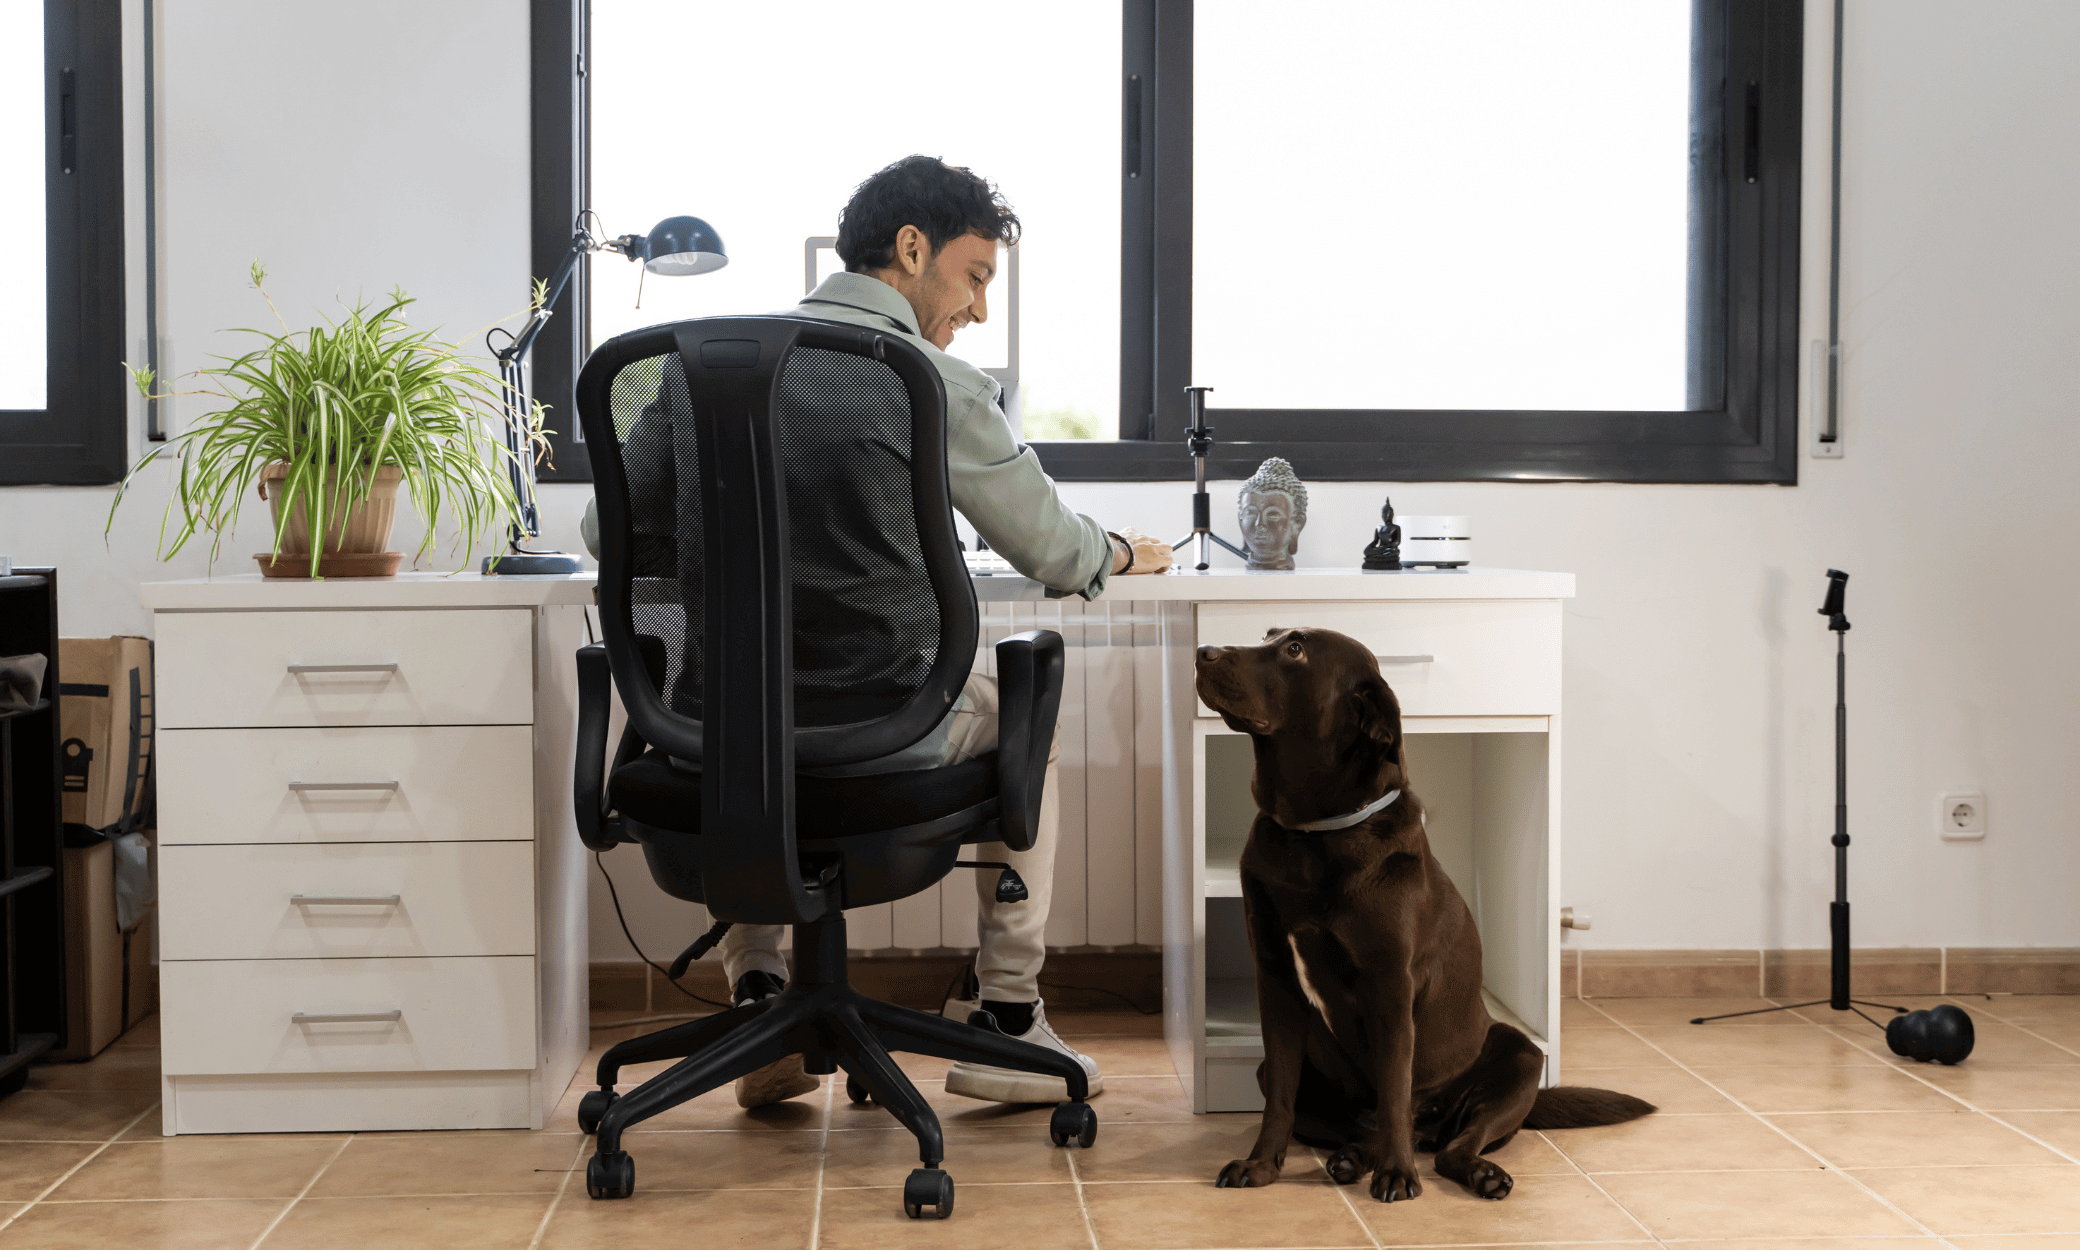 A person sitting at a desk and a dog